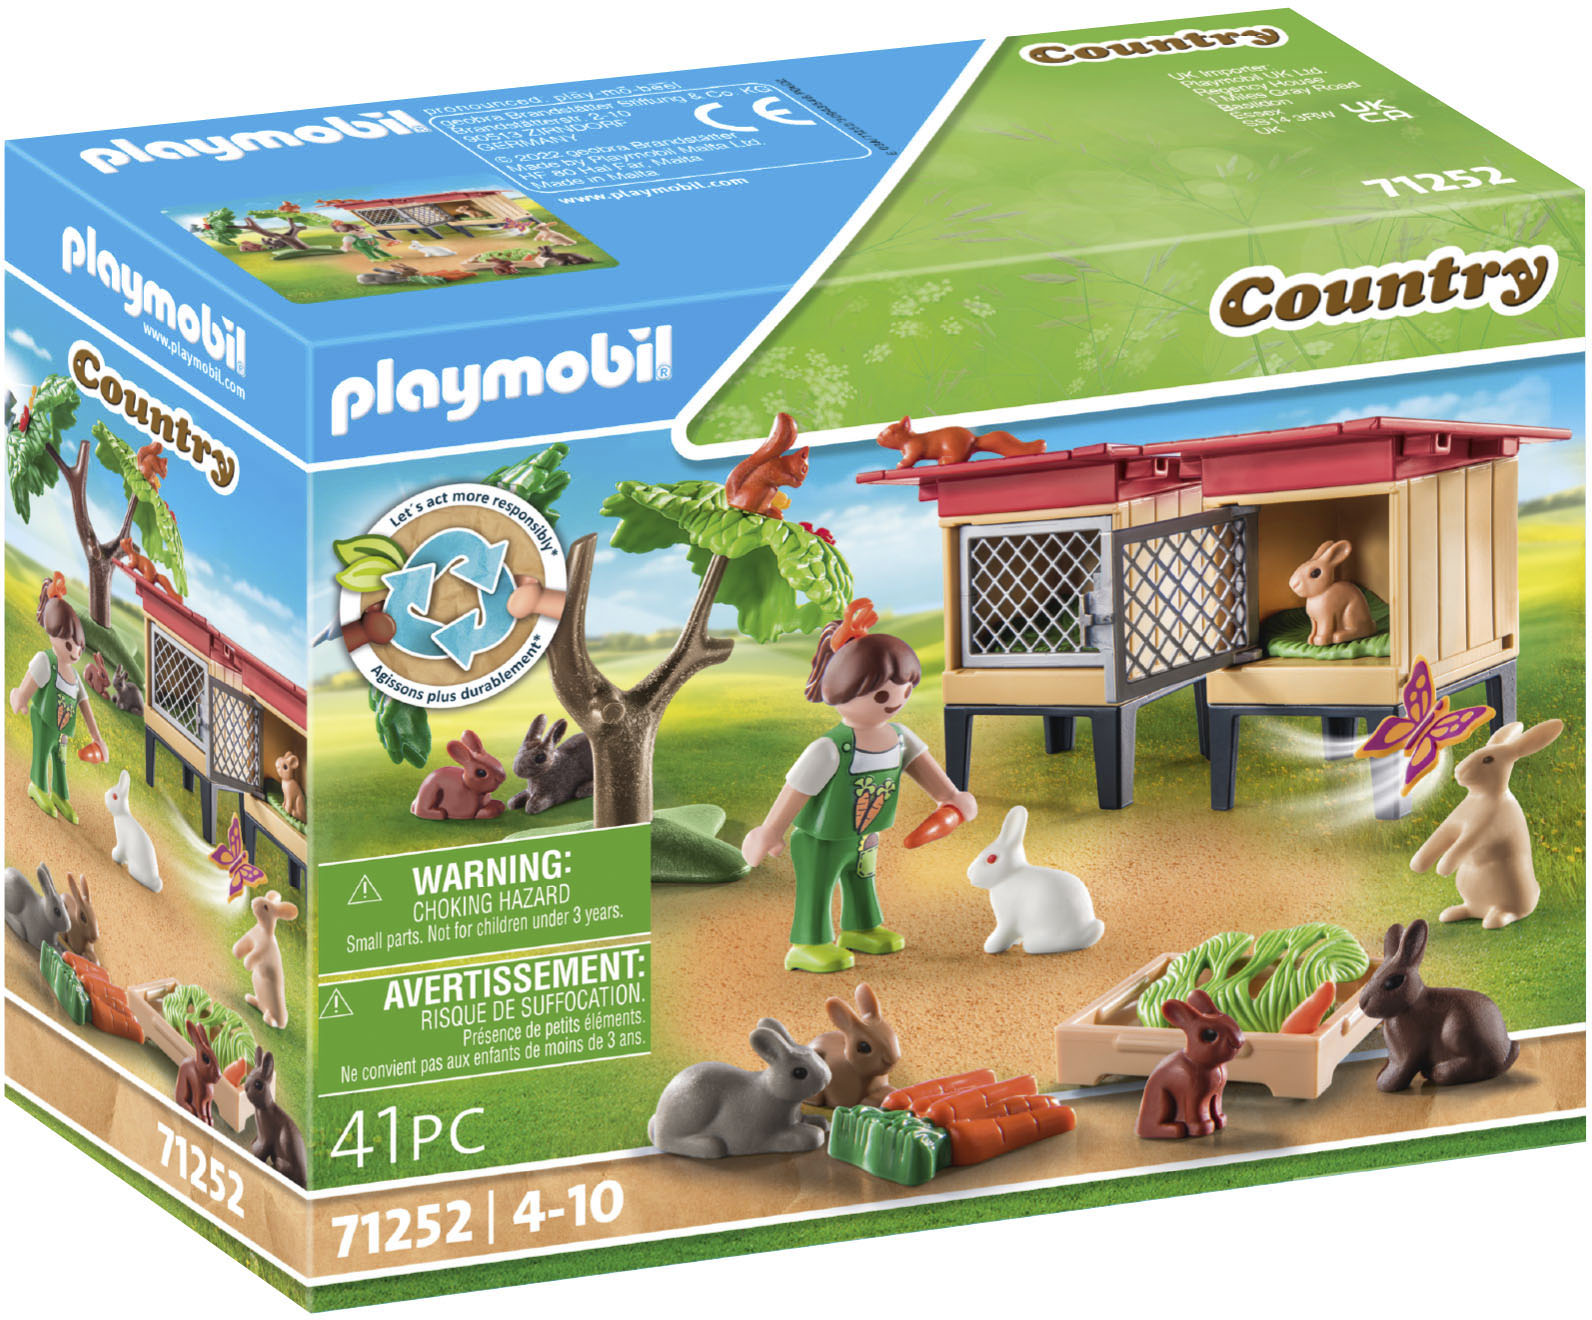 Playmobil® Konstruktions-Spielset »Kaninchenstall (71252), Country«, teilweise aus recyceltem Material; Made in Europe von Playmobil®